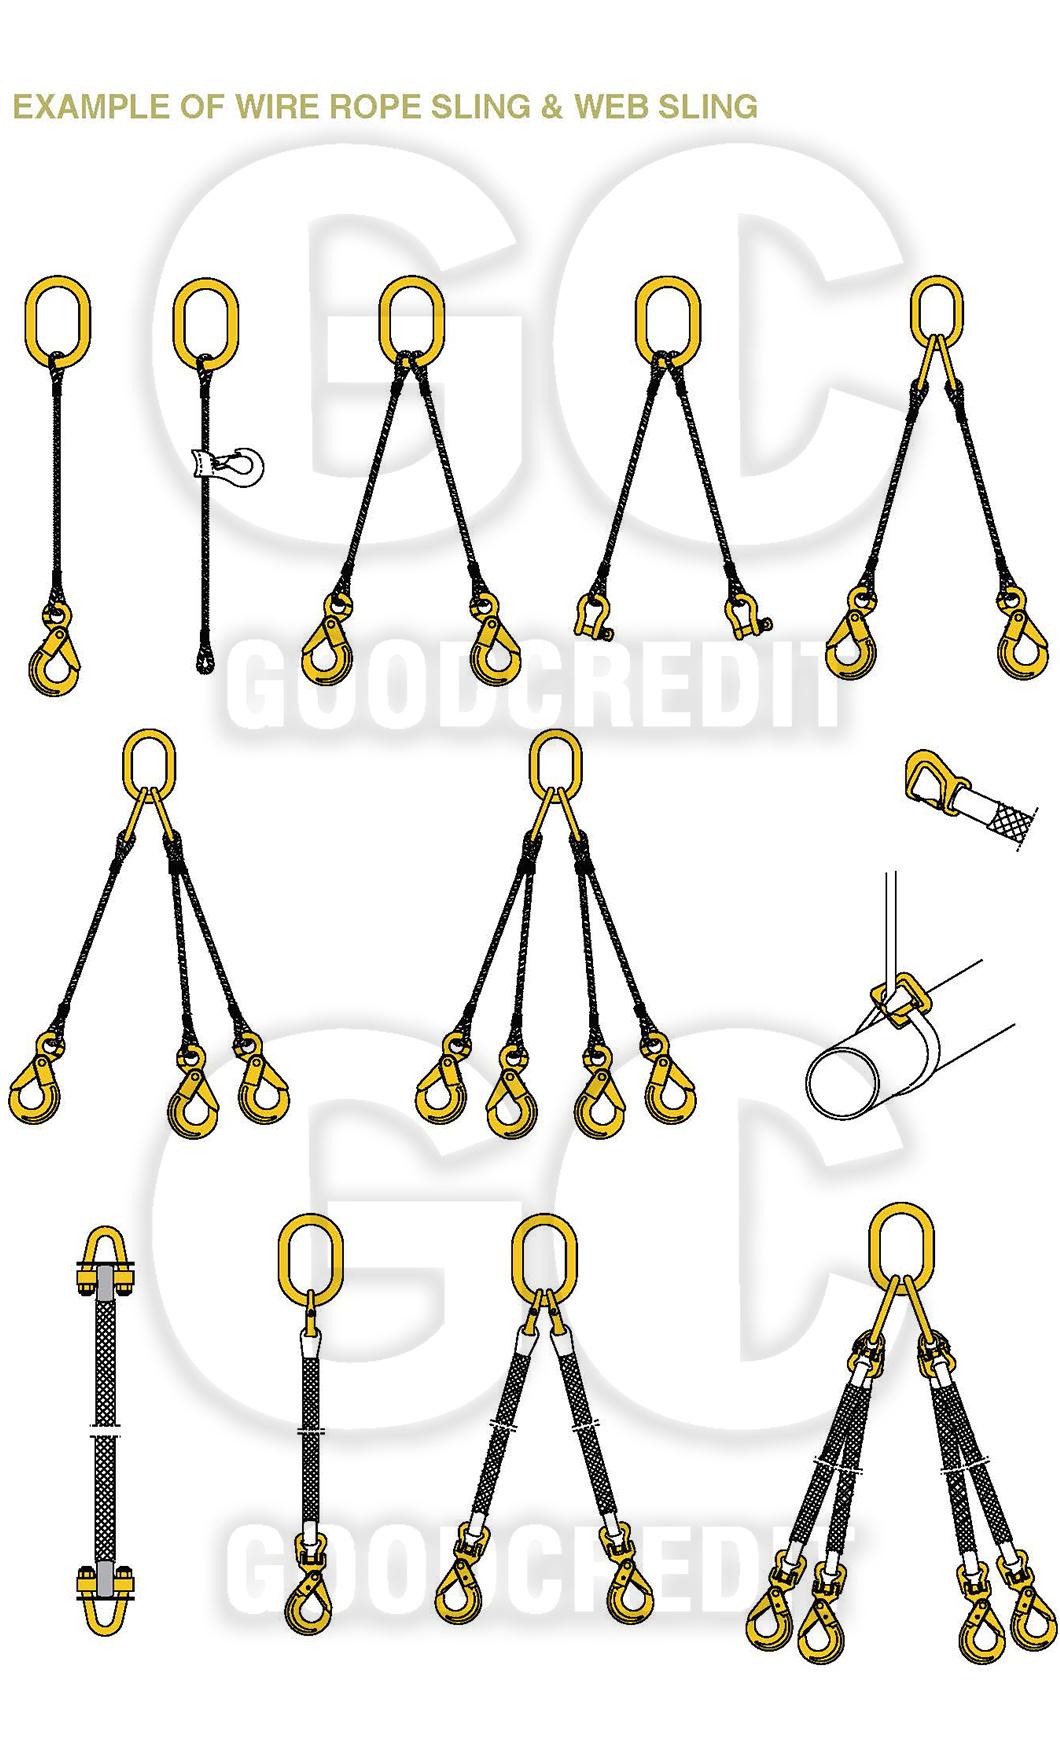 Us Standard G70 Binder Chain with Clevis Hooks Each End for Cargo Tie Down